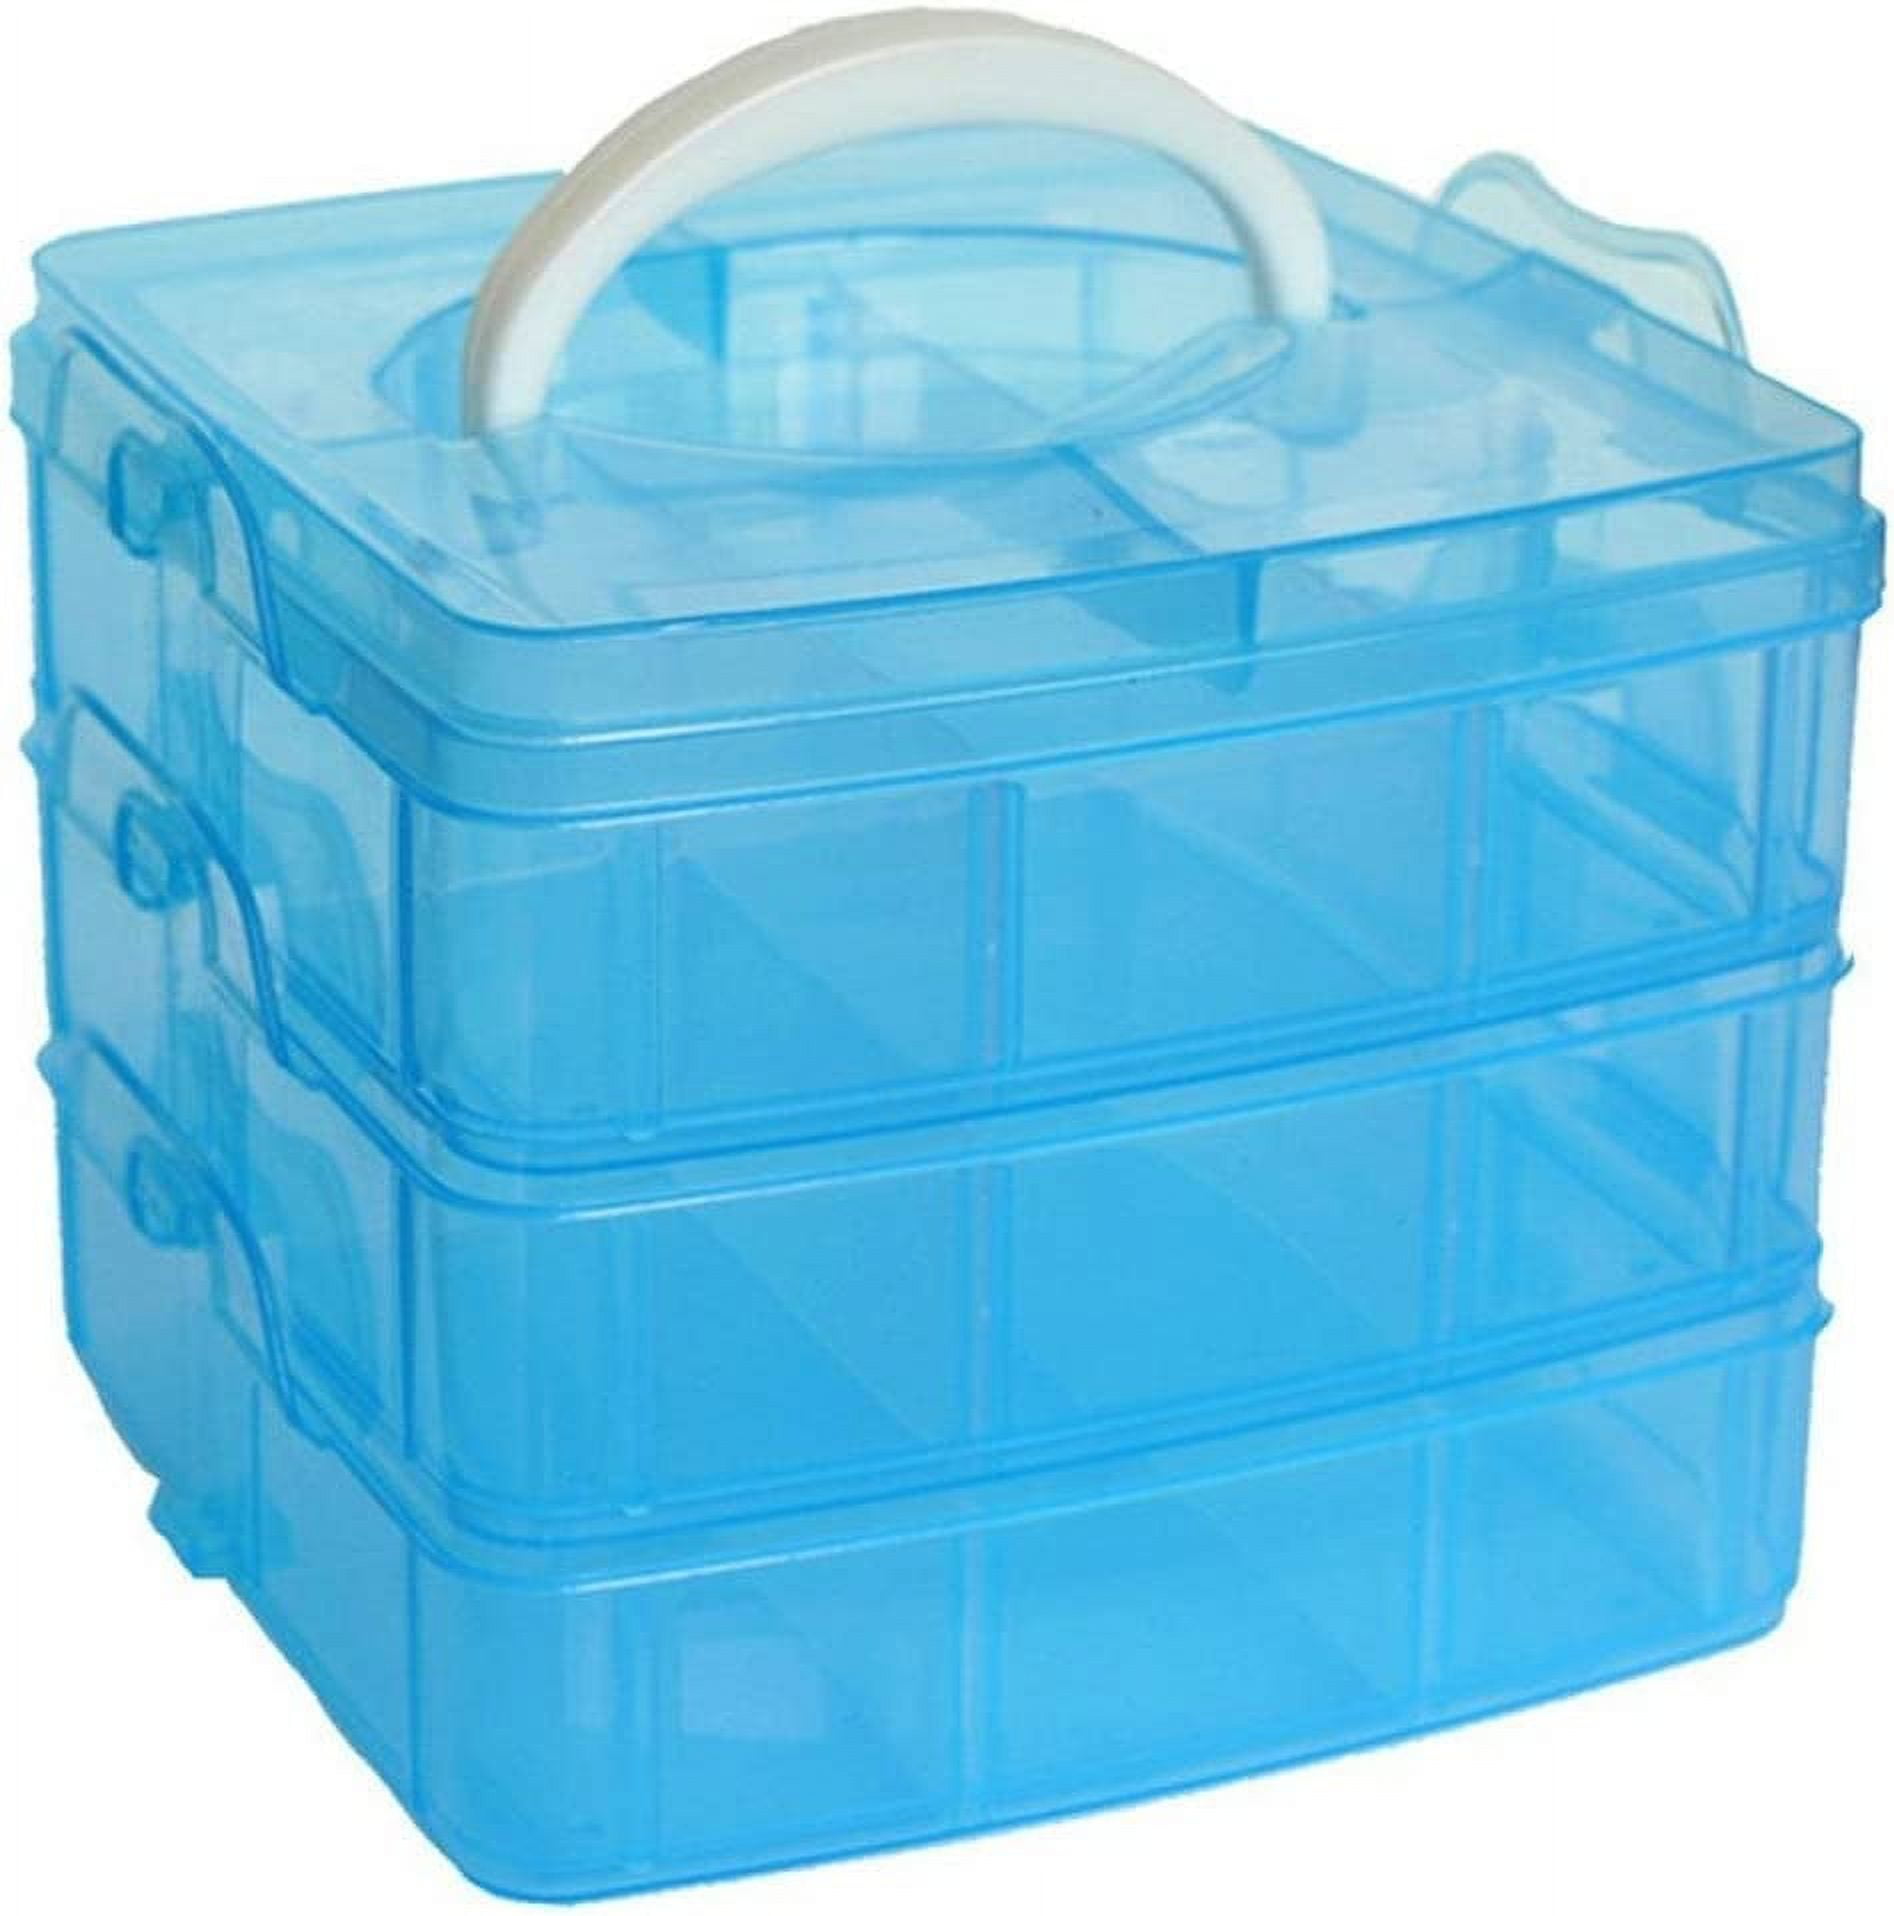 DARUITE Plastic Organizer Box Small Clear Storage Containers with Lid  Adjustabl